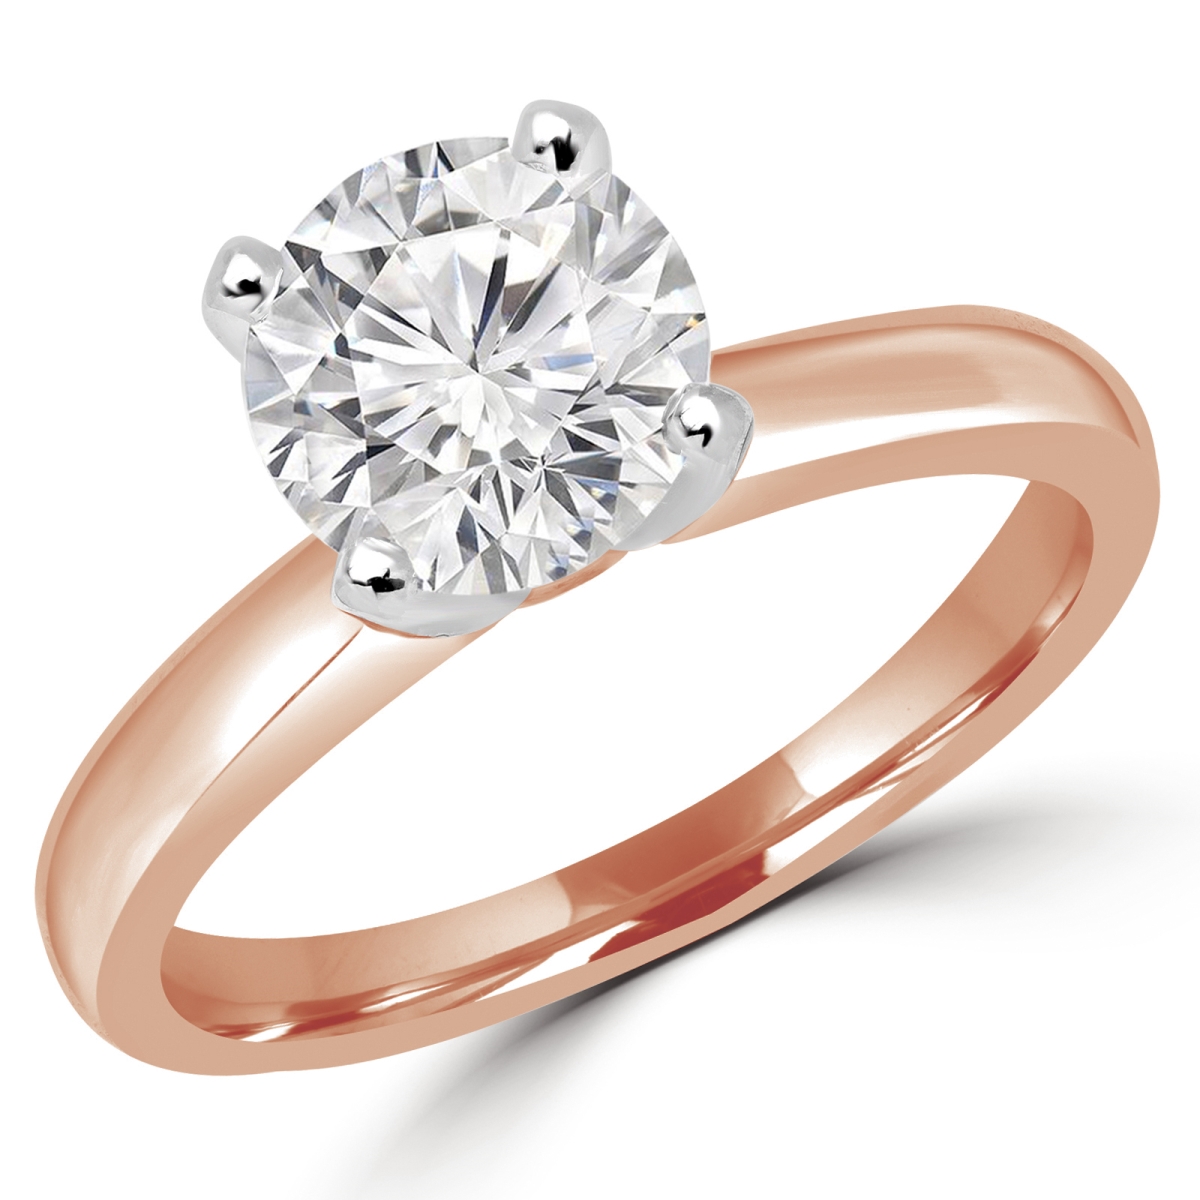 Picture of Majesty Diamonds MD180009-5.5 0.6 CT Round Diamond Solitaire Engagement Ring in 14K Rose Gold - Size 5.5